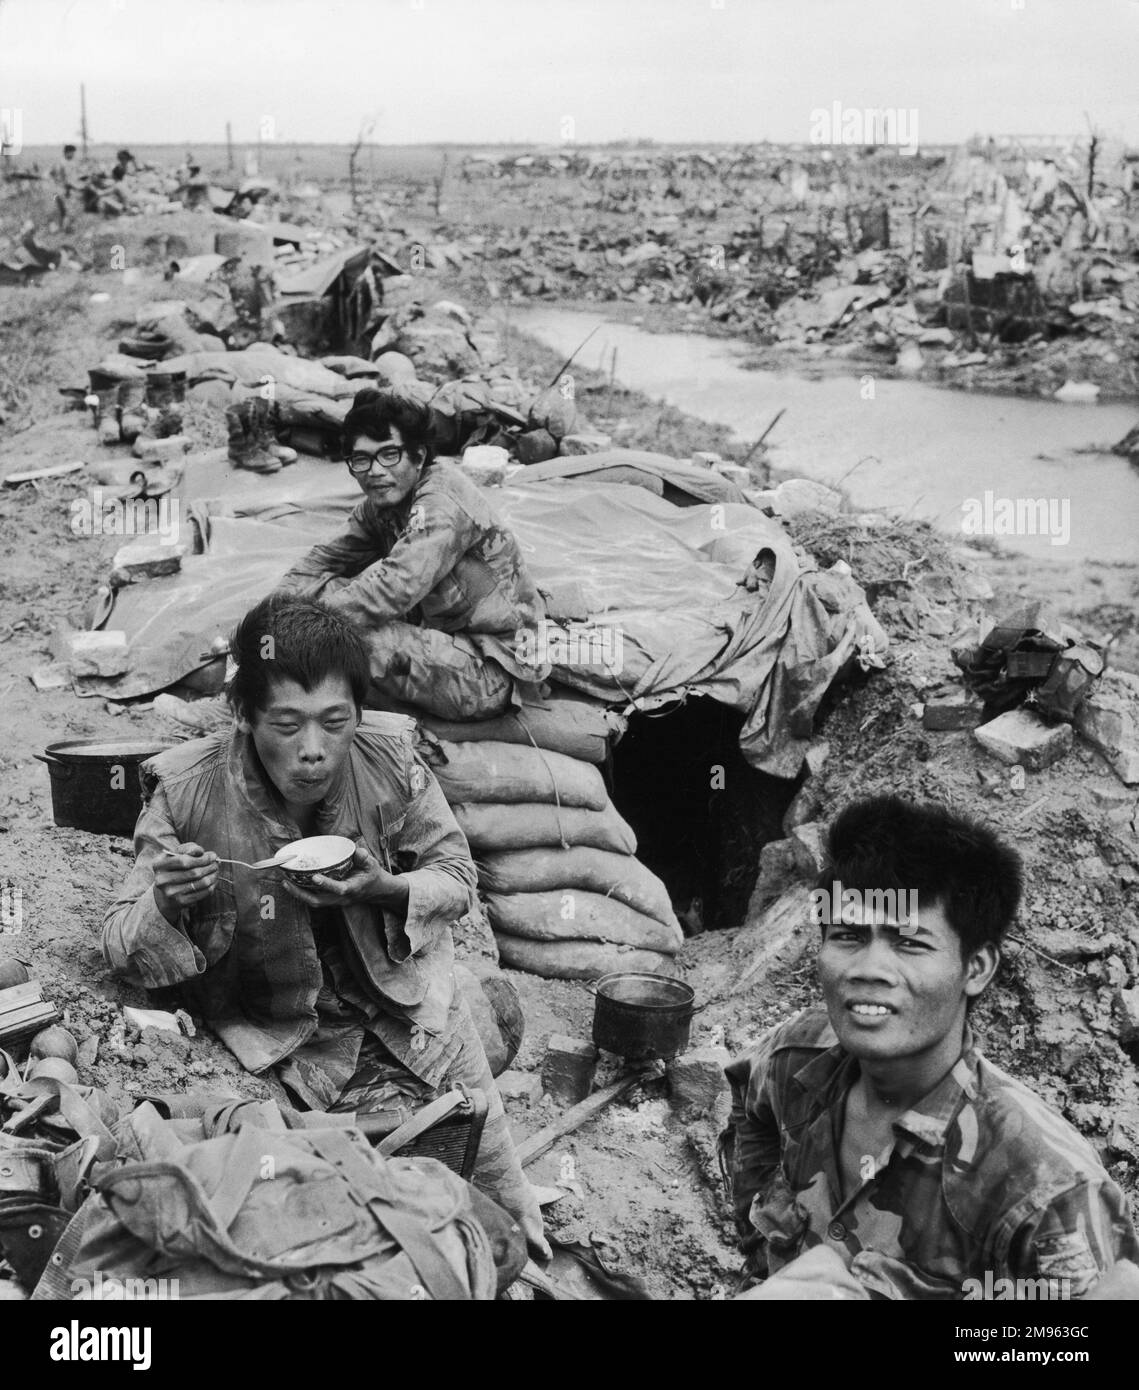 Quang Tri: Three Vietnamese soldiers rest, (one eating rice), among the rubble of their town which has been destroyed by Viet Cong attacks Stock Photo